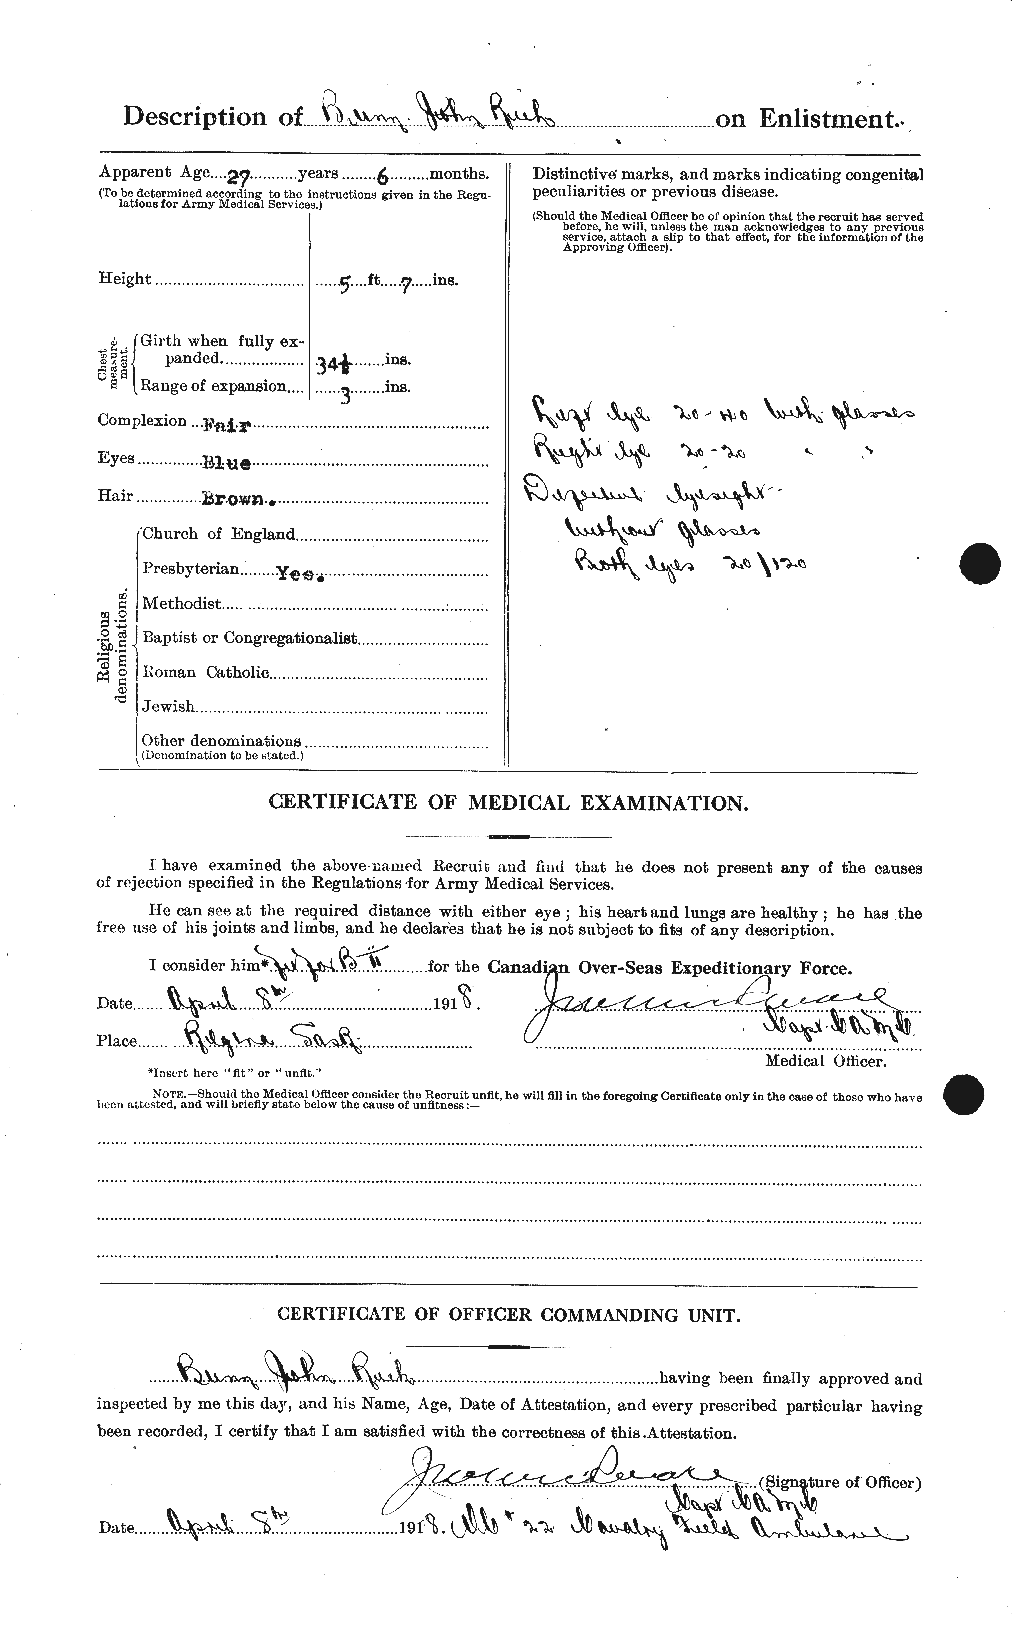 Personnel Records of the First World War - CEF 270420b